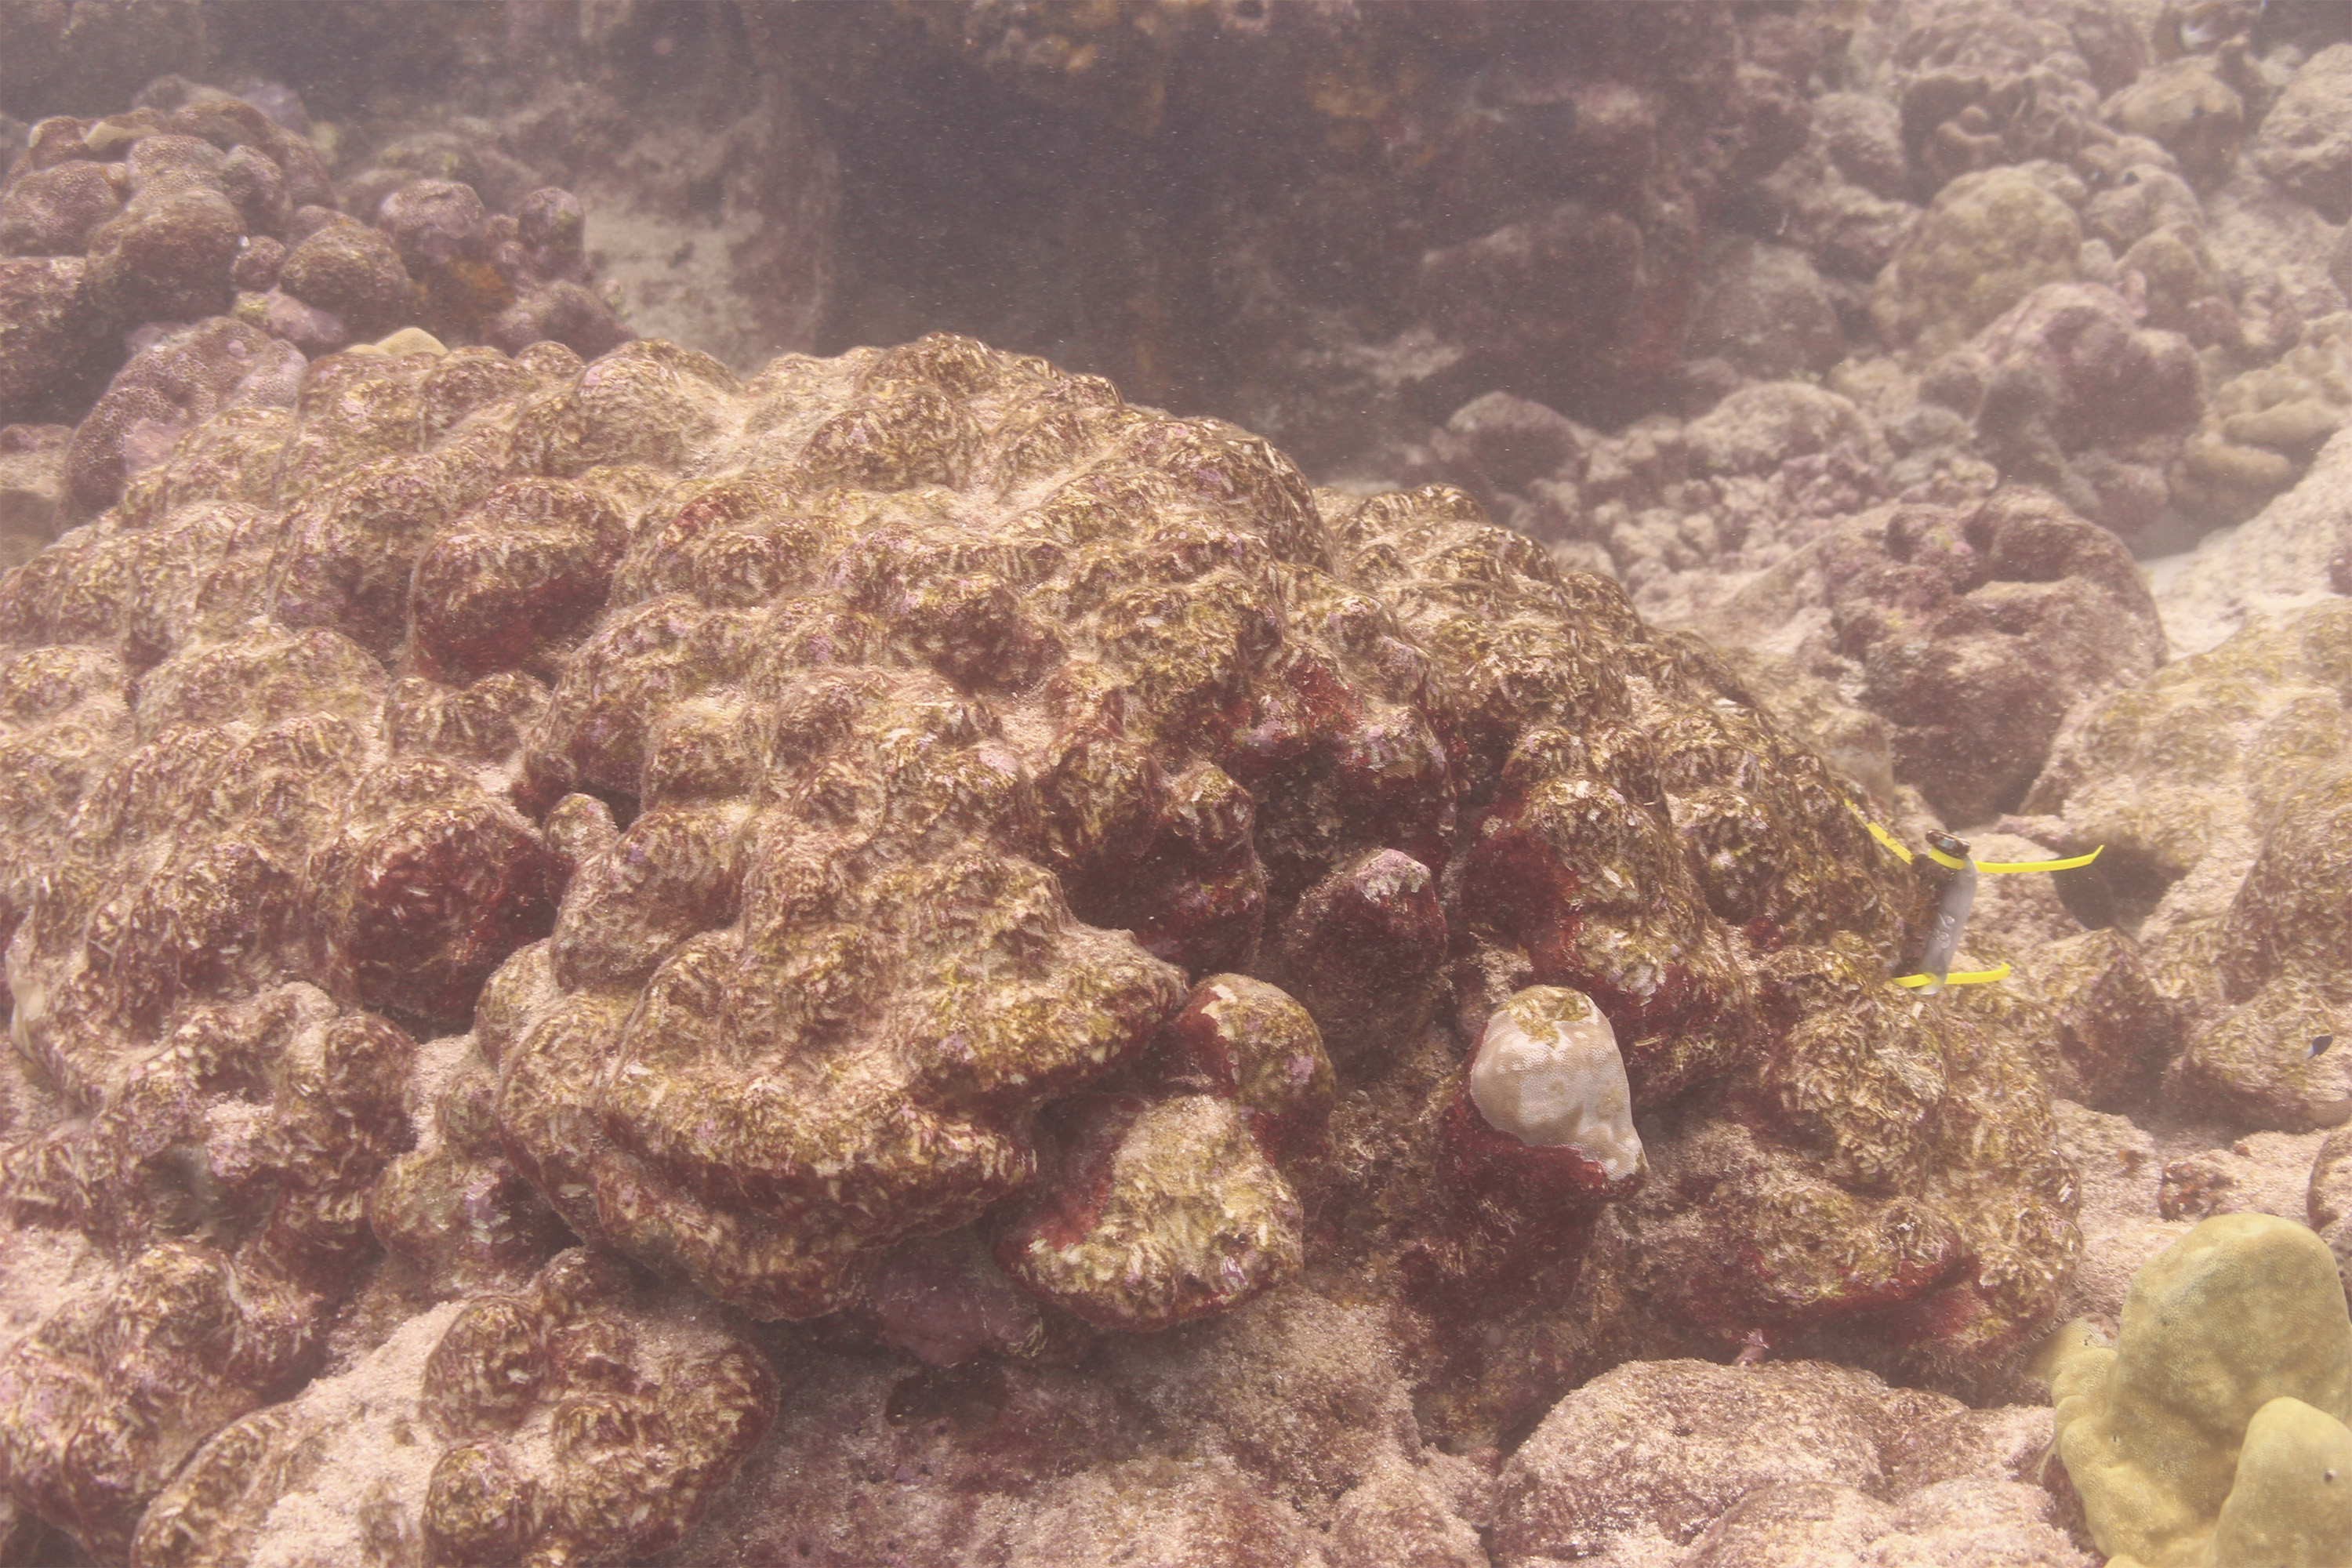 In November of 2015, 30 percent of coral at Christmas Island were dead. This month, 80 percent have perished.